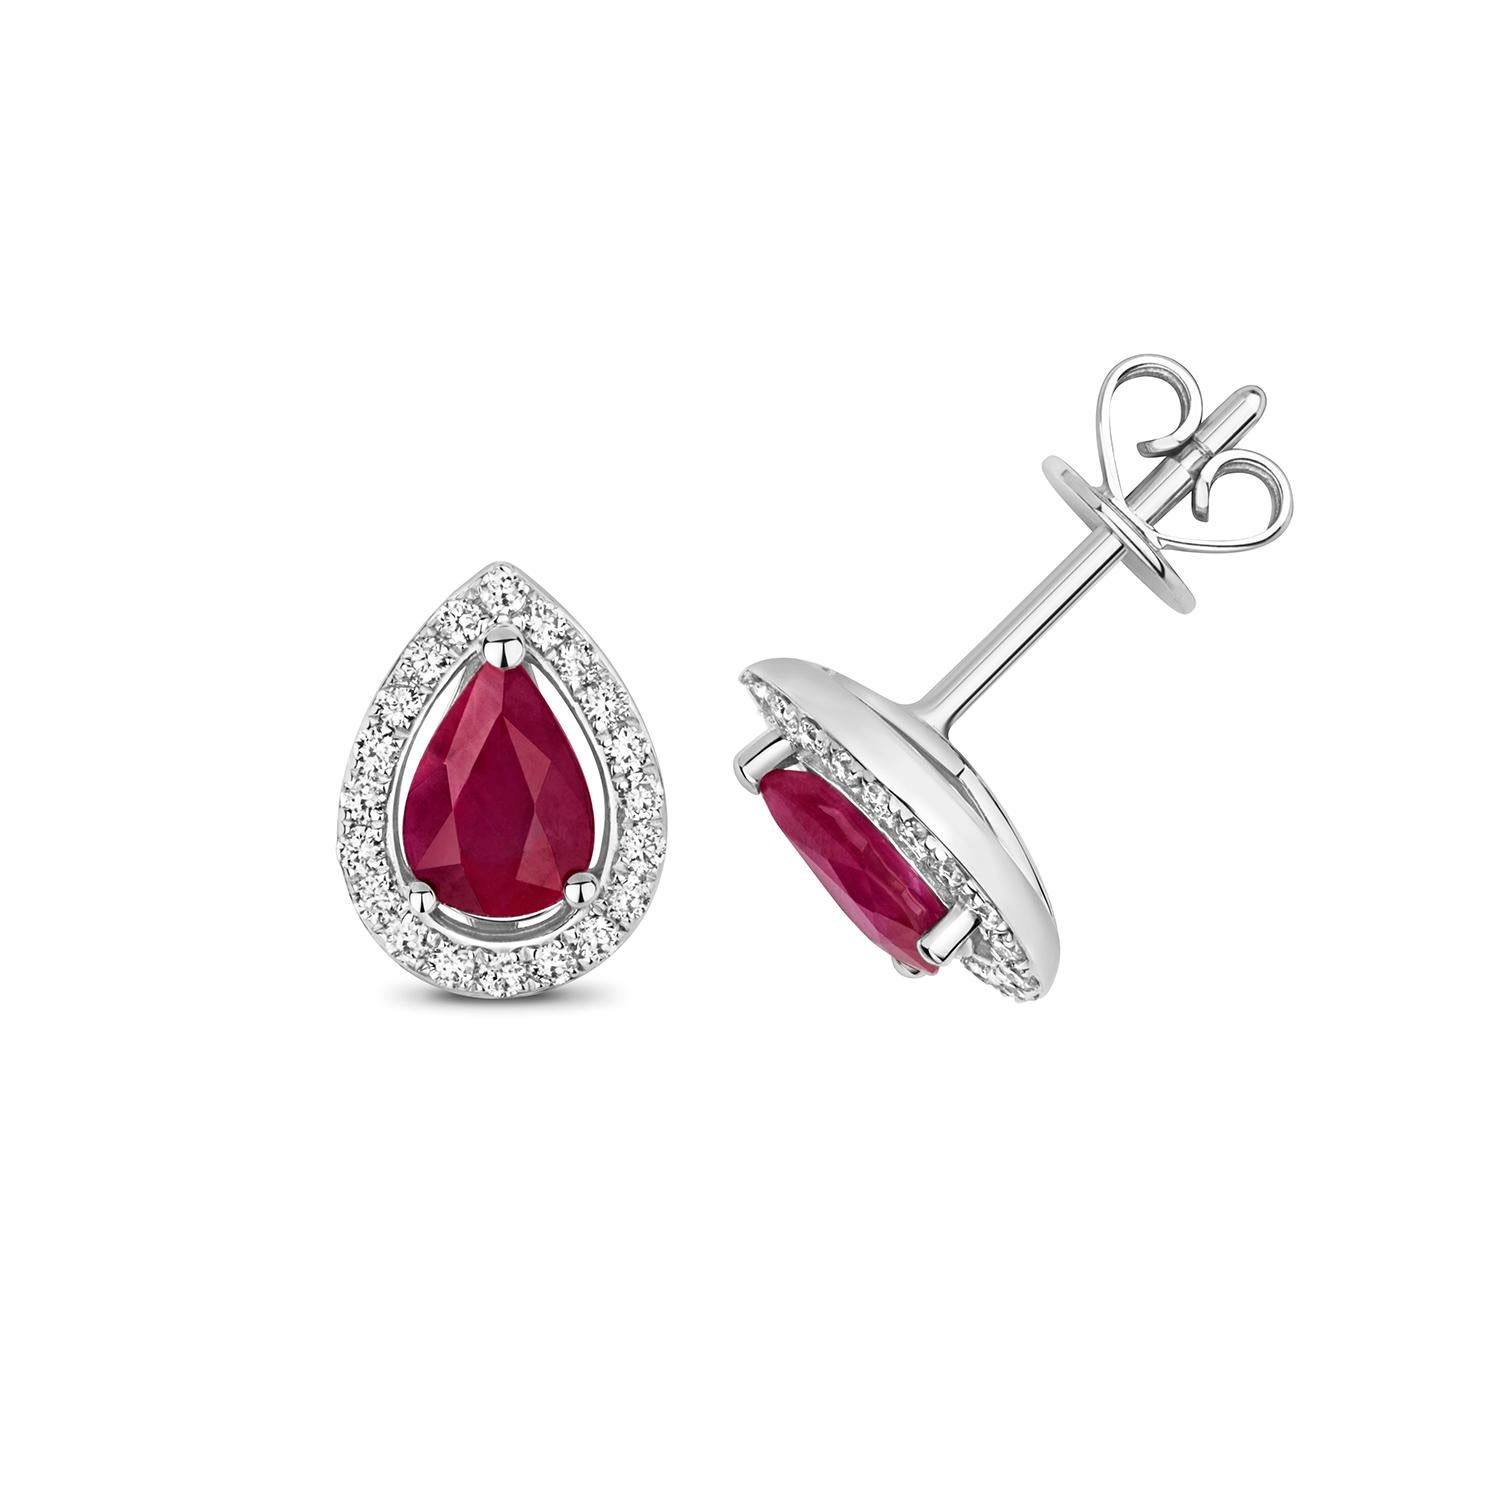 DIAMOND AND RUBY HALO STUDS PEAR

9K W/G 40RD/0.17 2RUB/0.96

Weight: 1.4g

Number Of Stones:2+40

Total Carates:0.960+0.170